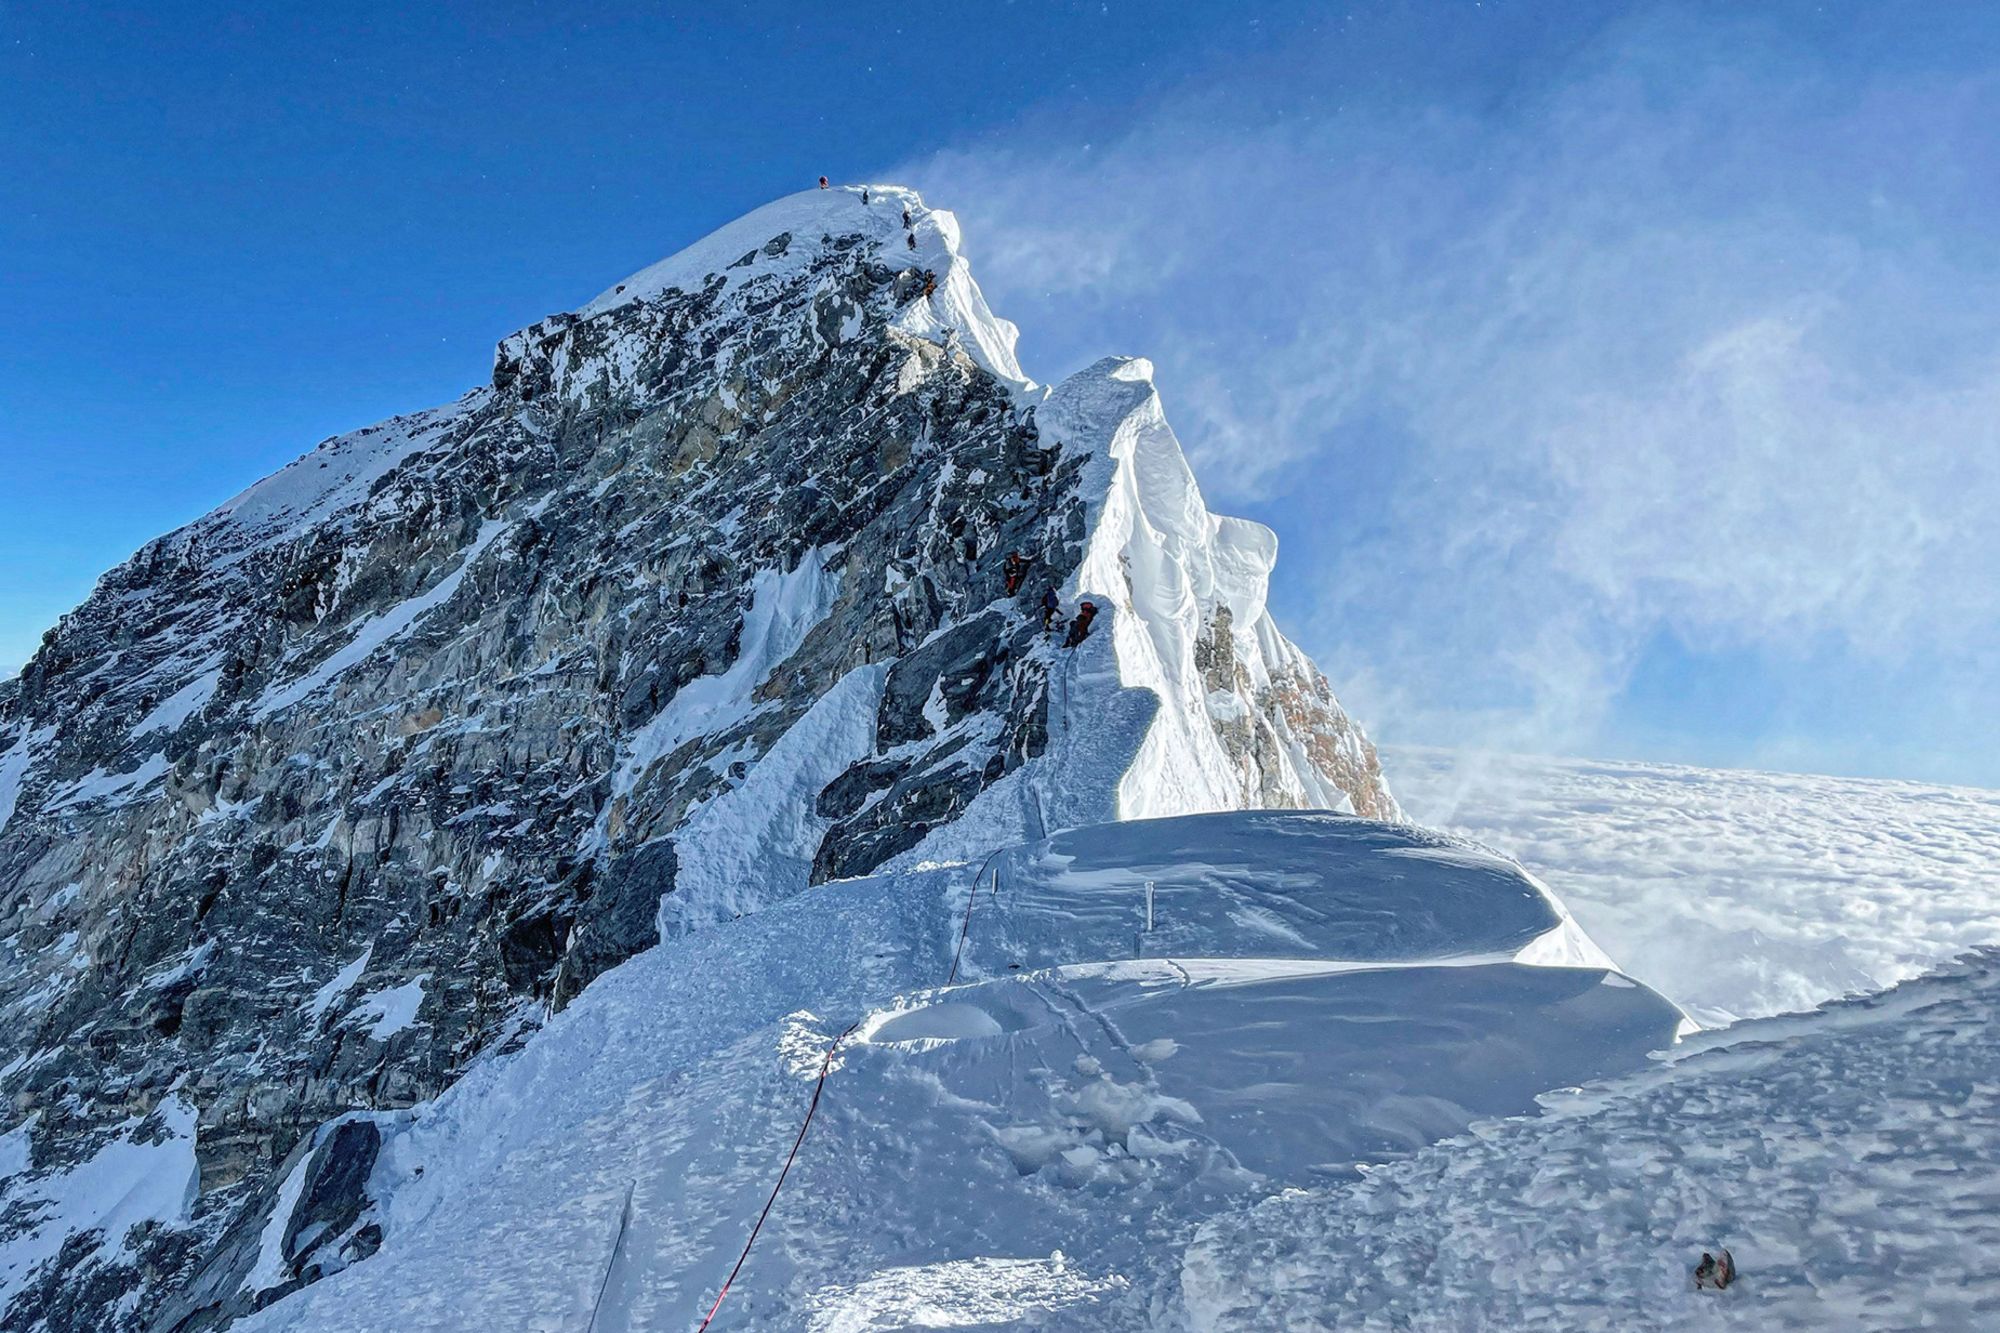 Mountaineers climbing the Hillary Step during their ascend of the South face to summit Mount Everest on May 31, 2021.